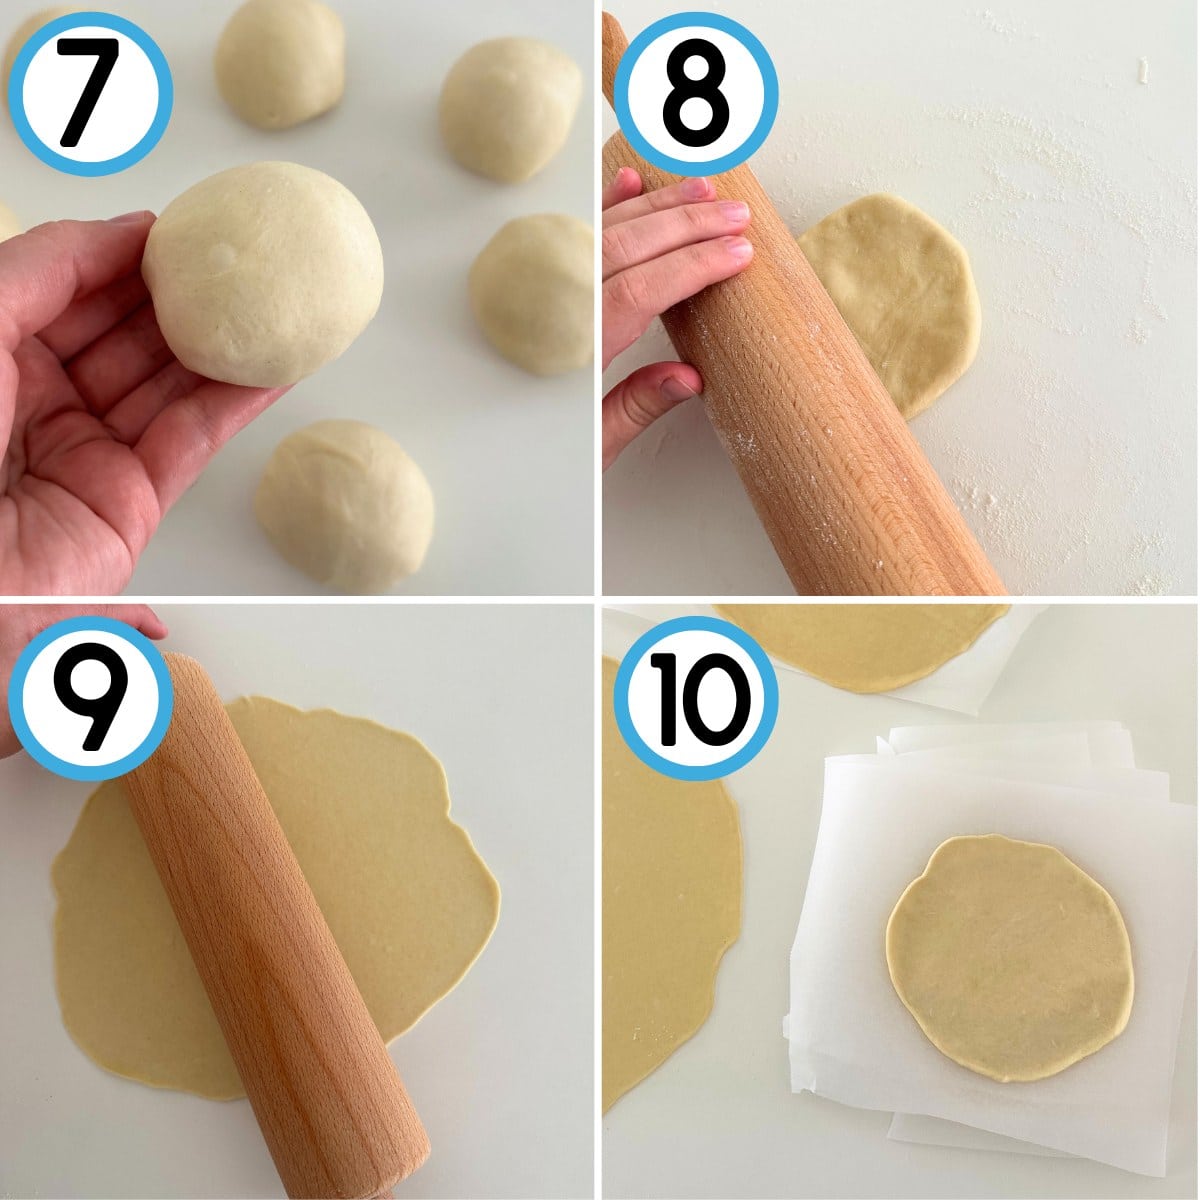 Continued directions of making tortillas: 7. Dough balls divided into smaller portions. 8. Roll dough with a rolling pin. 9. Continue to roll dough until it is thin. 10. Roll all dough balls and stack with parchment paper.